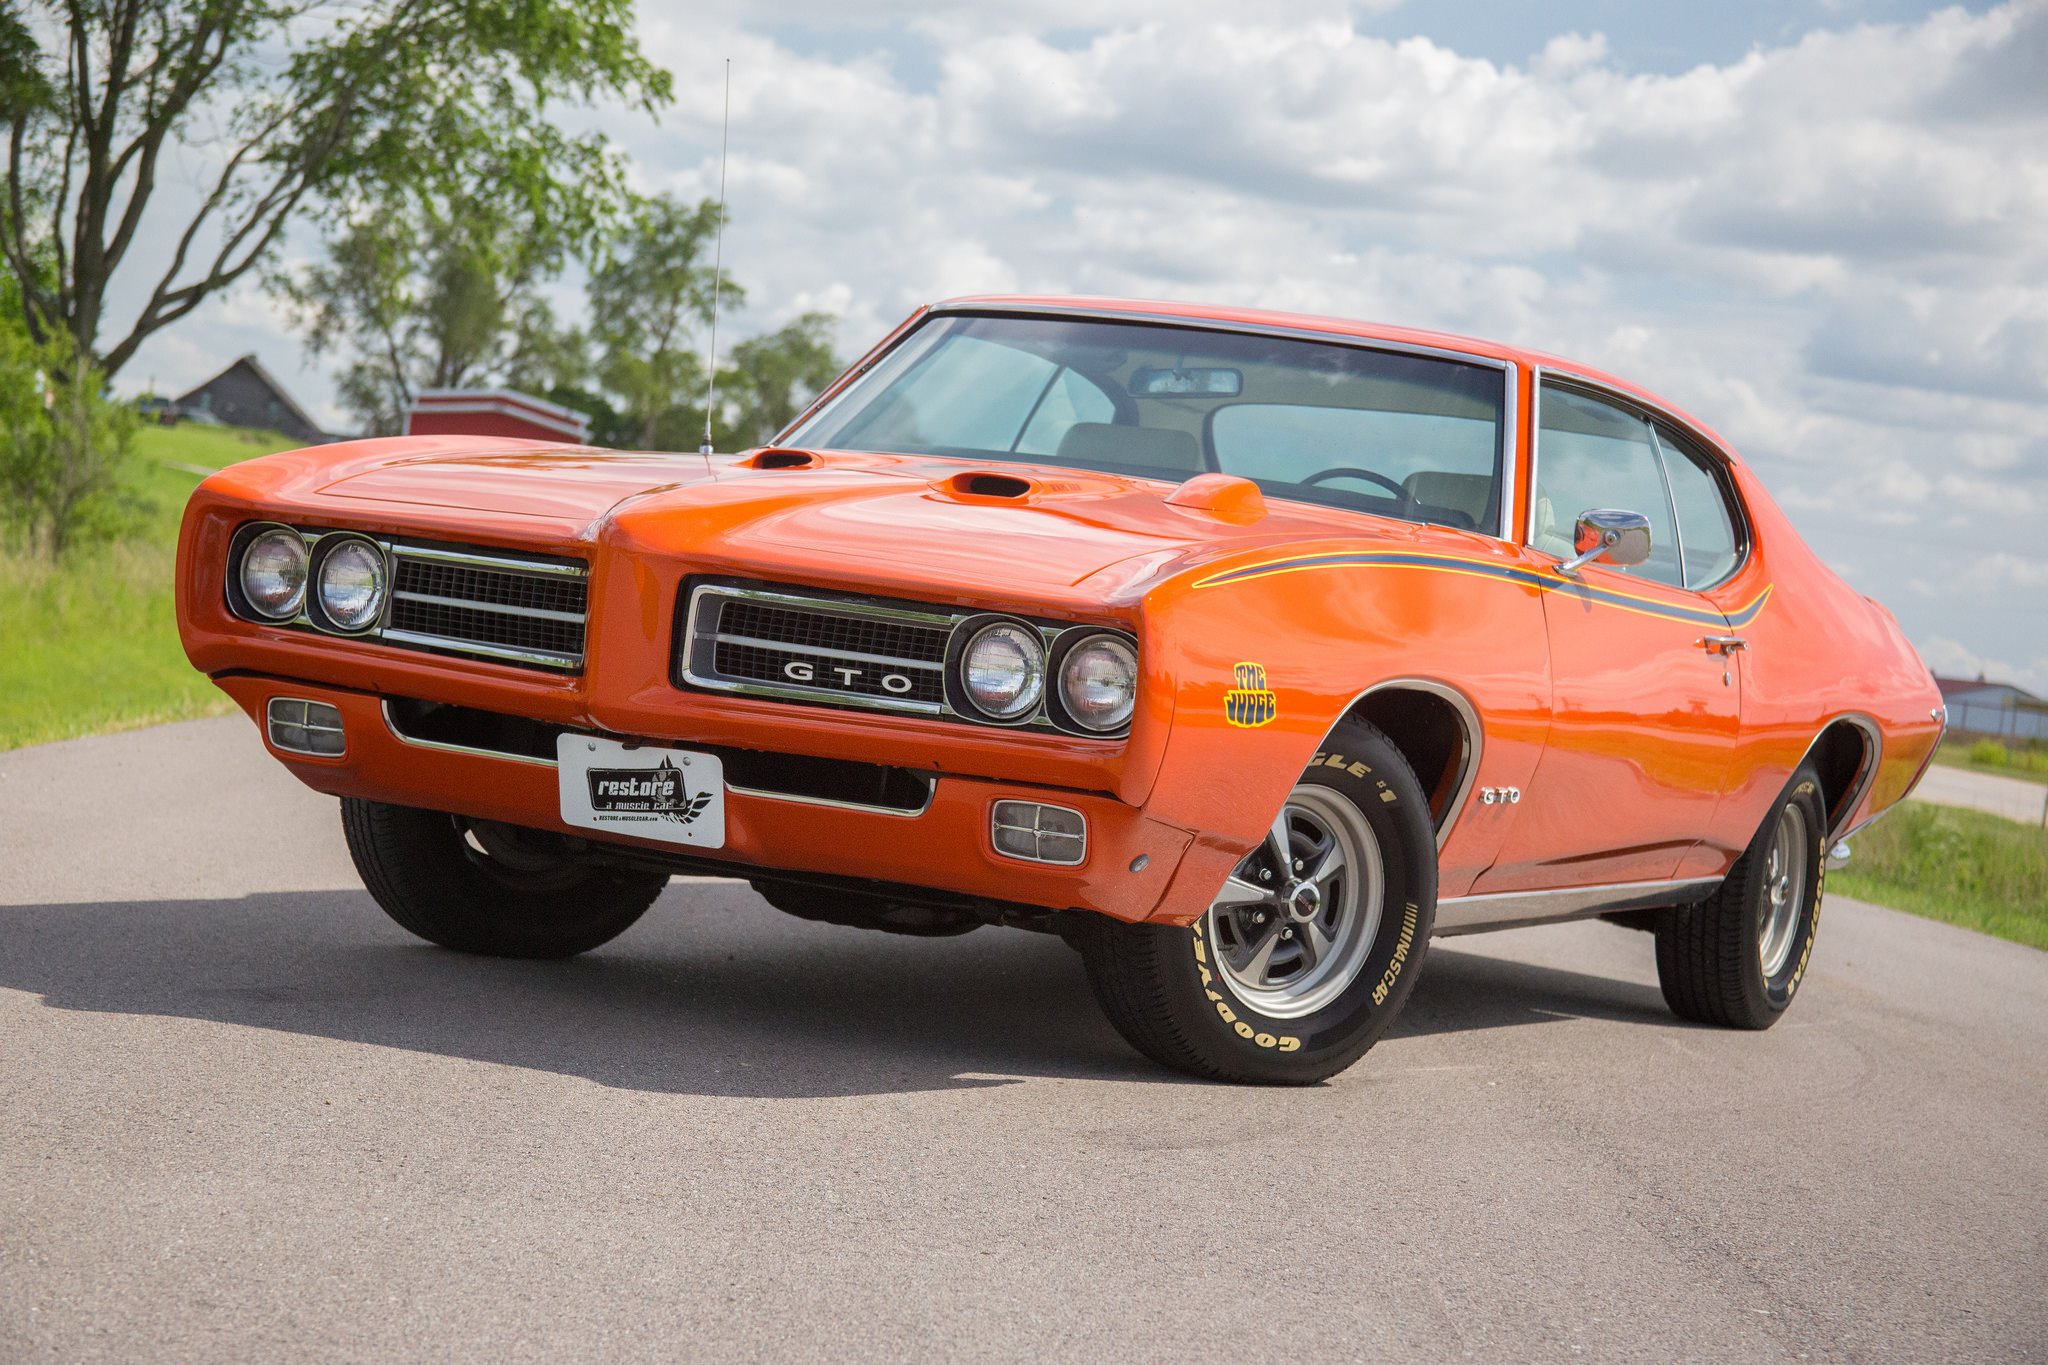 Pontiac, Gto, Judge, Cars, Coupe Wallpaper HD / Desktop and Mobile Background